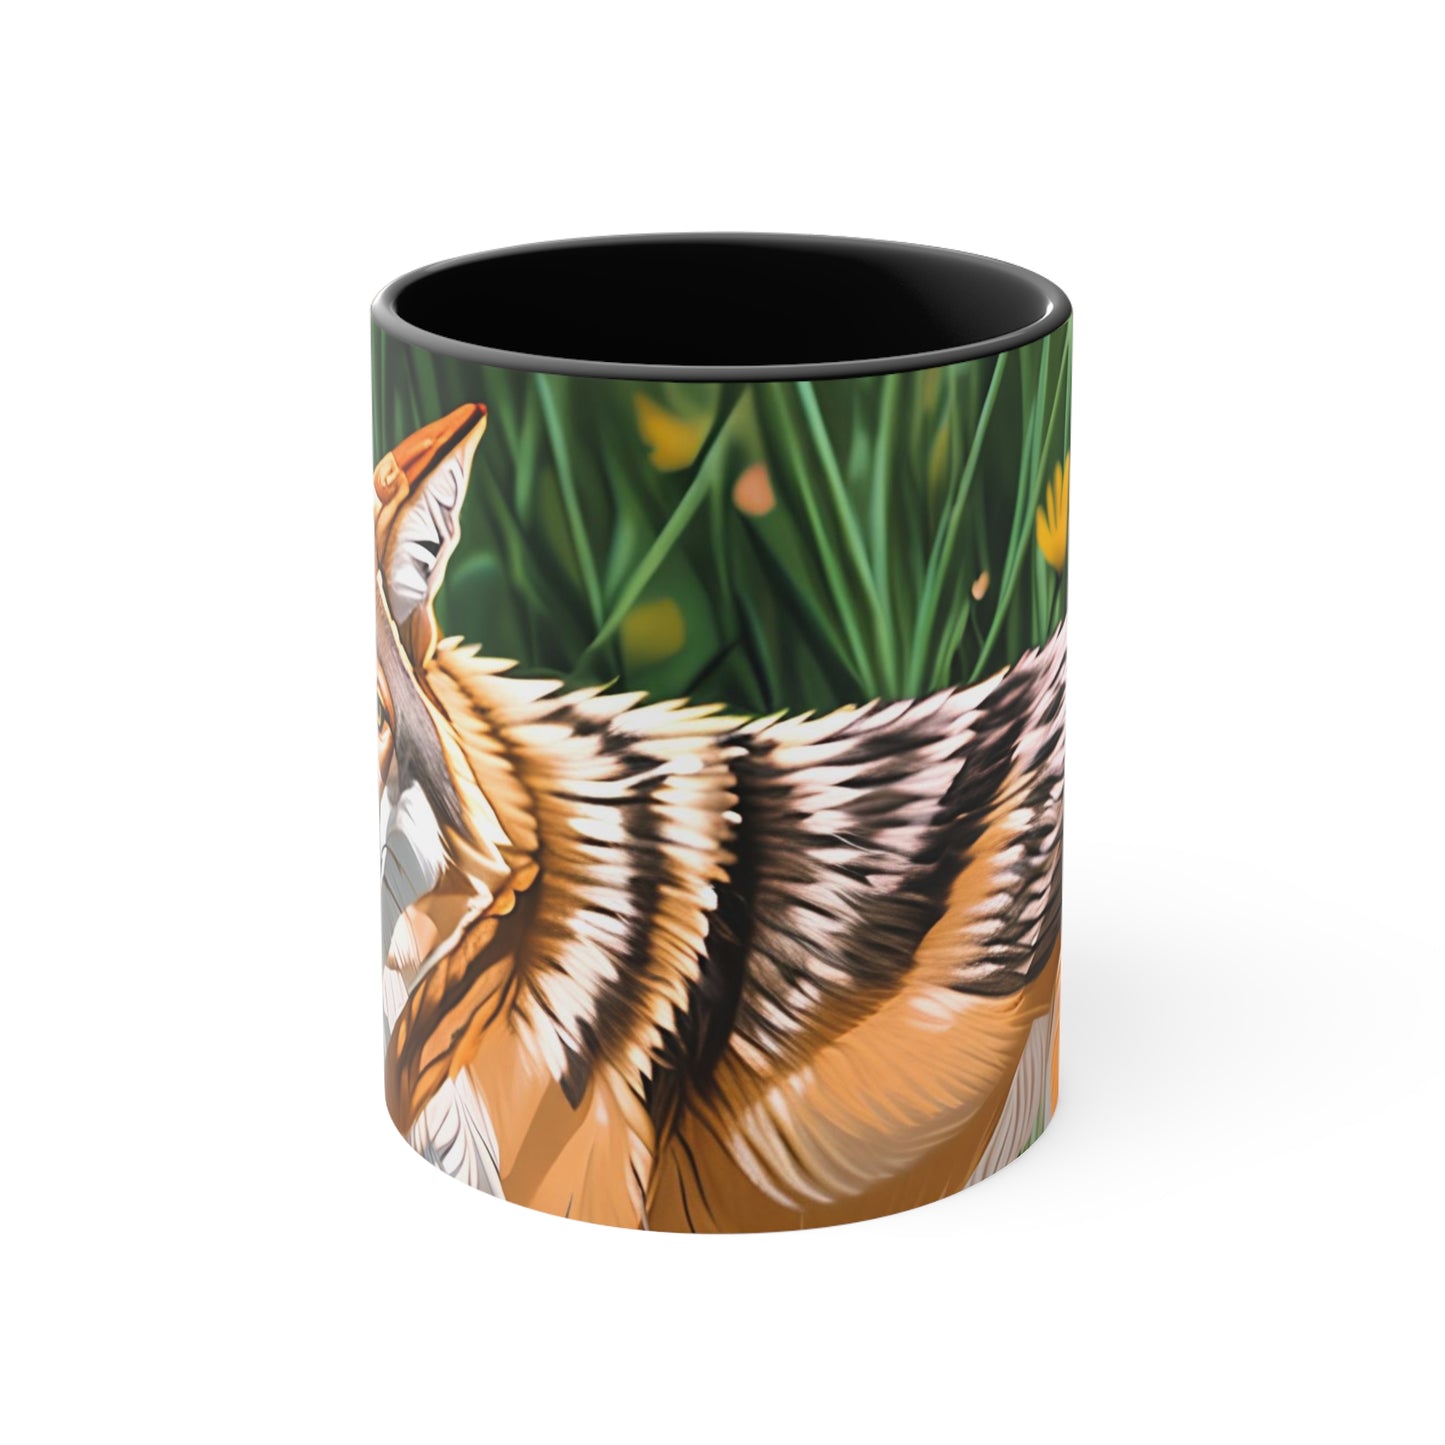 Coyote with Flowers, Ceramic Mug - Perfect for Coffee, Tea, and More!